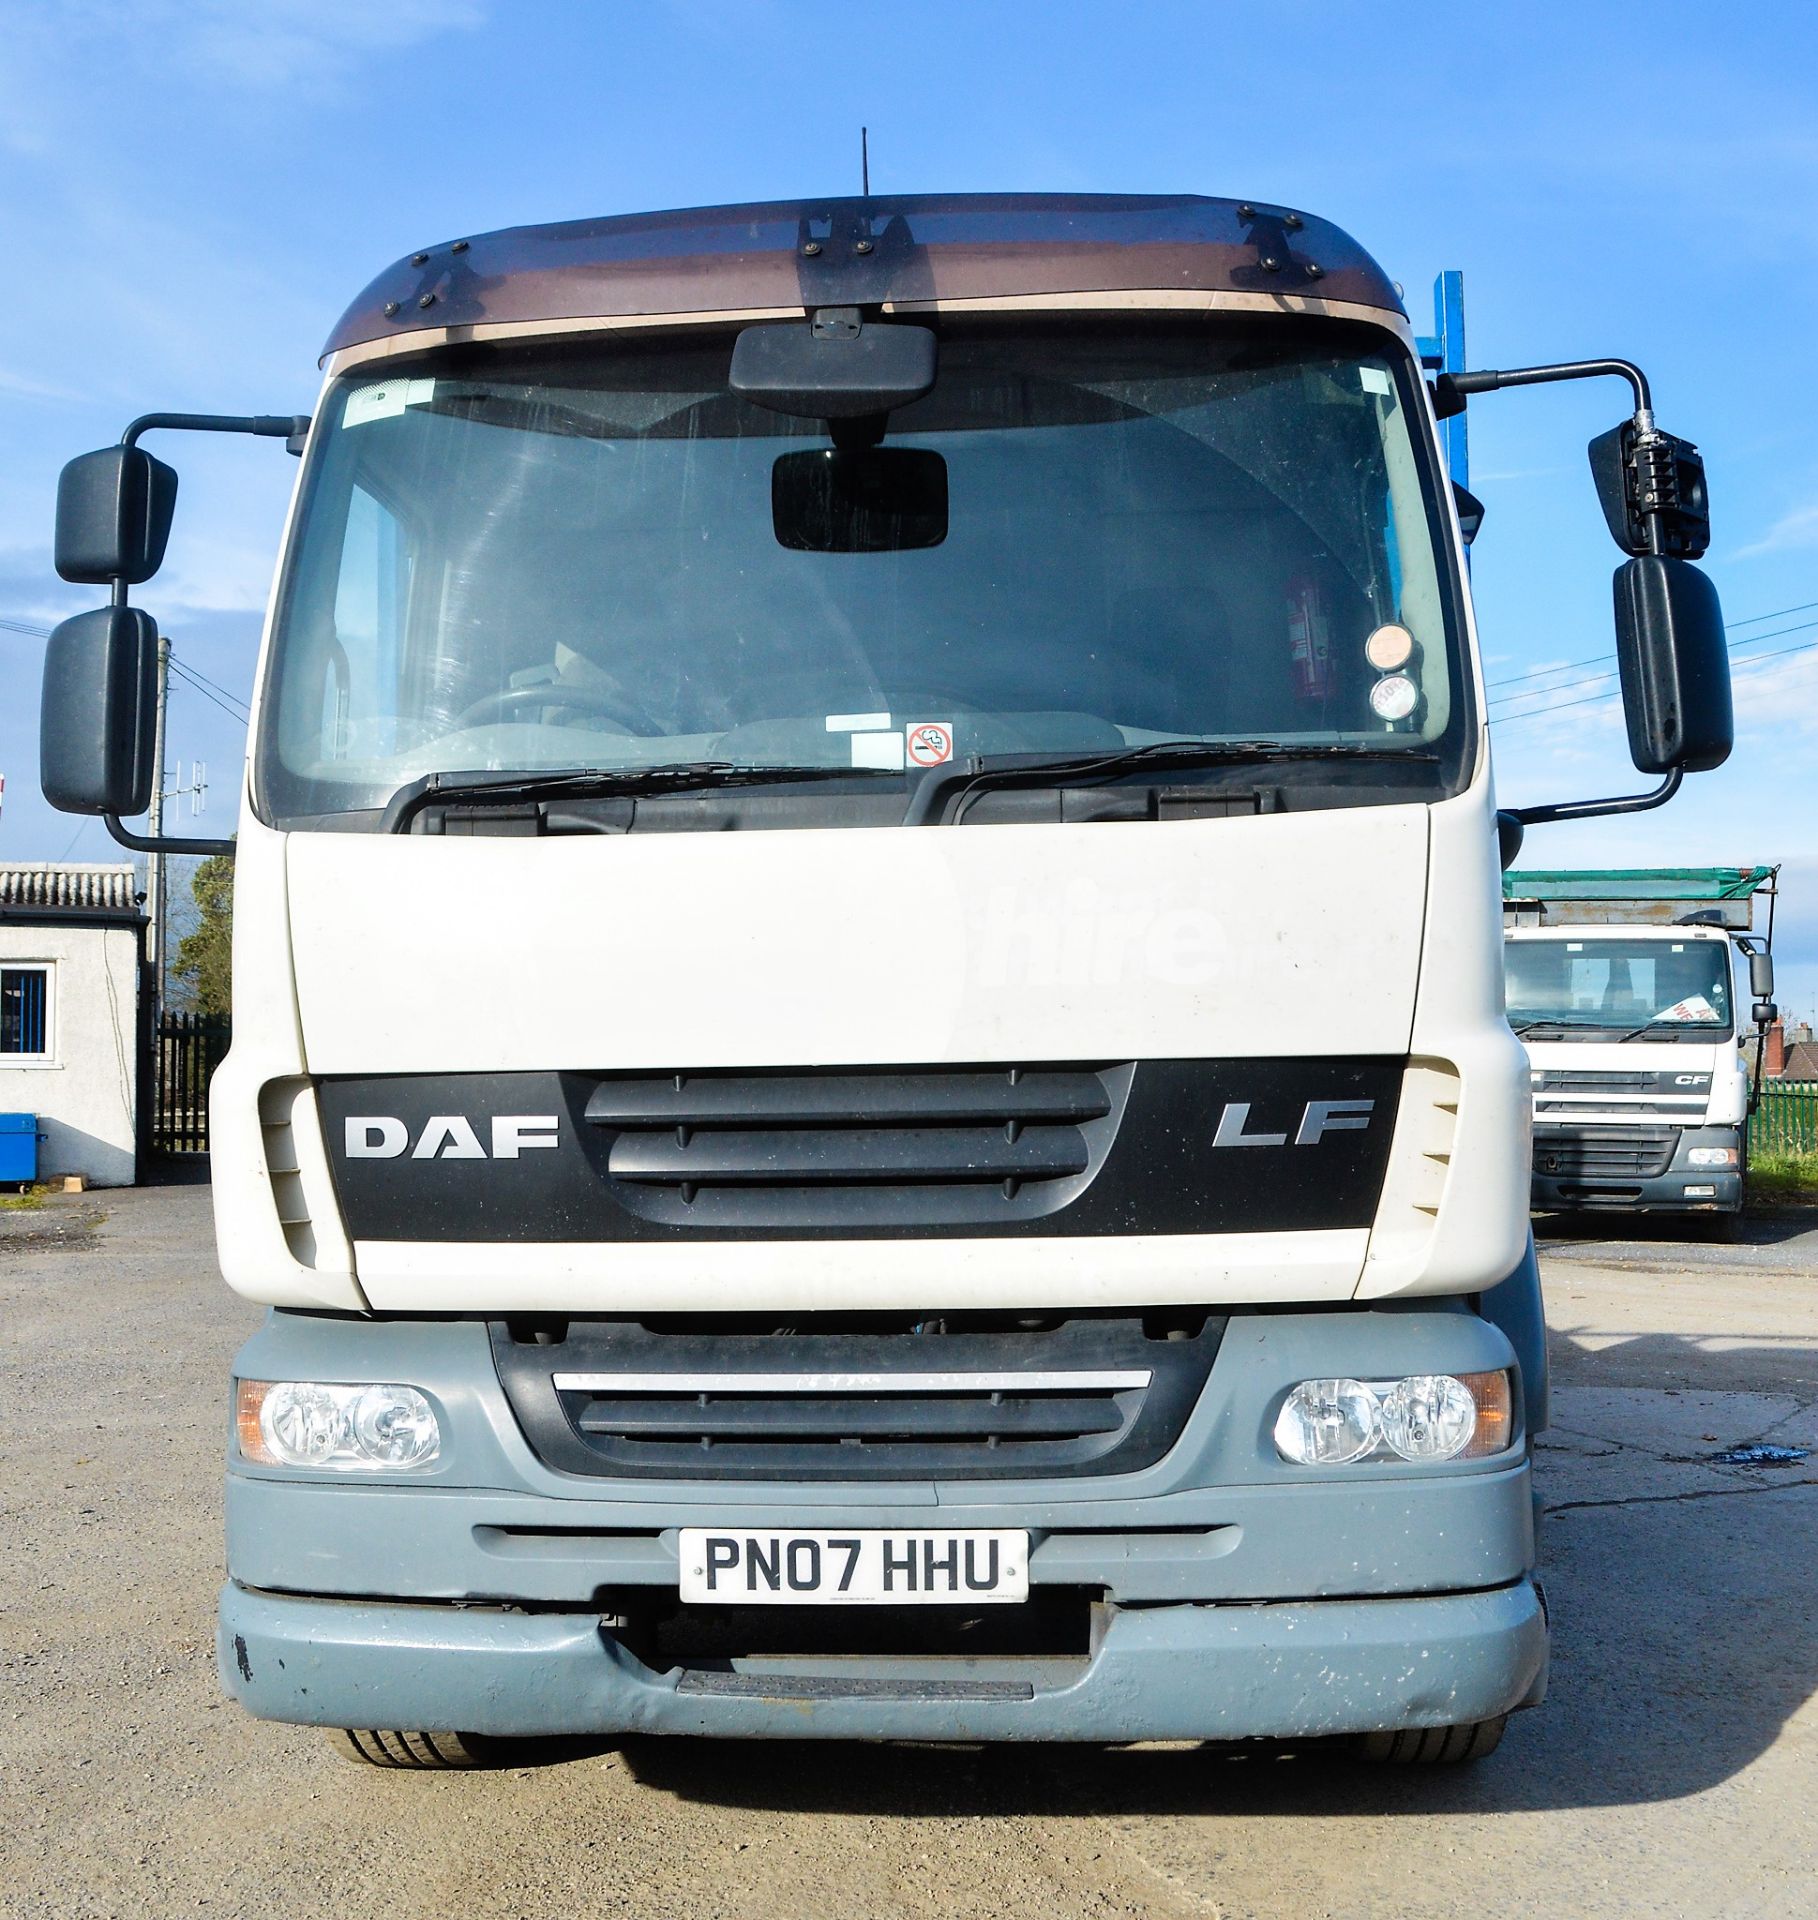 DAF 55.220 18 tonne 4 x 2 beaver tail plant lorry Registration Number: PN07 HHU Date of - Image 5 of 10